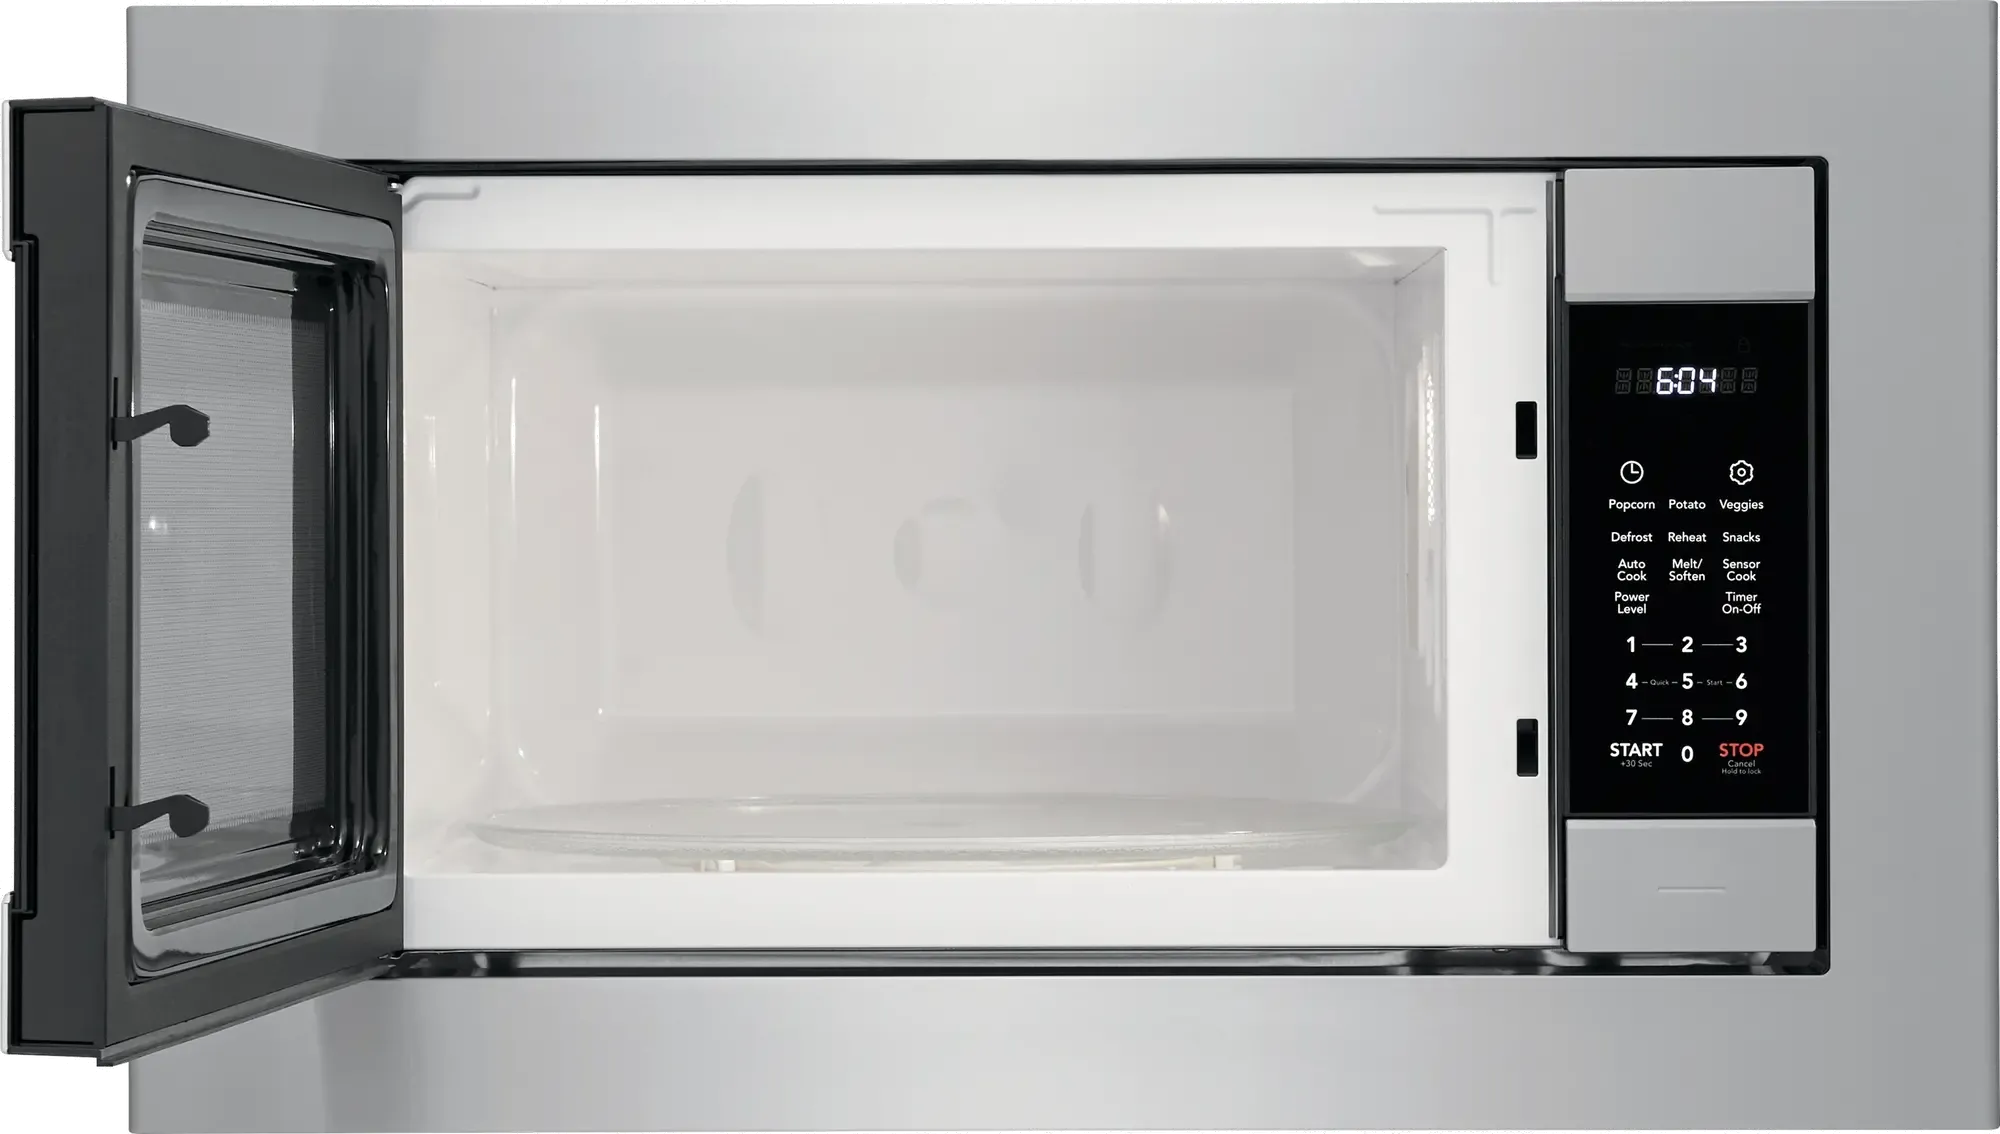 Frigidaire Gallery 24 Inch Countertop Microwave - 2.2 cu. ft.， Stainless Steel